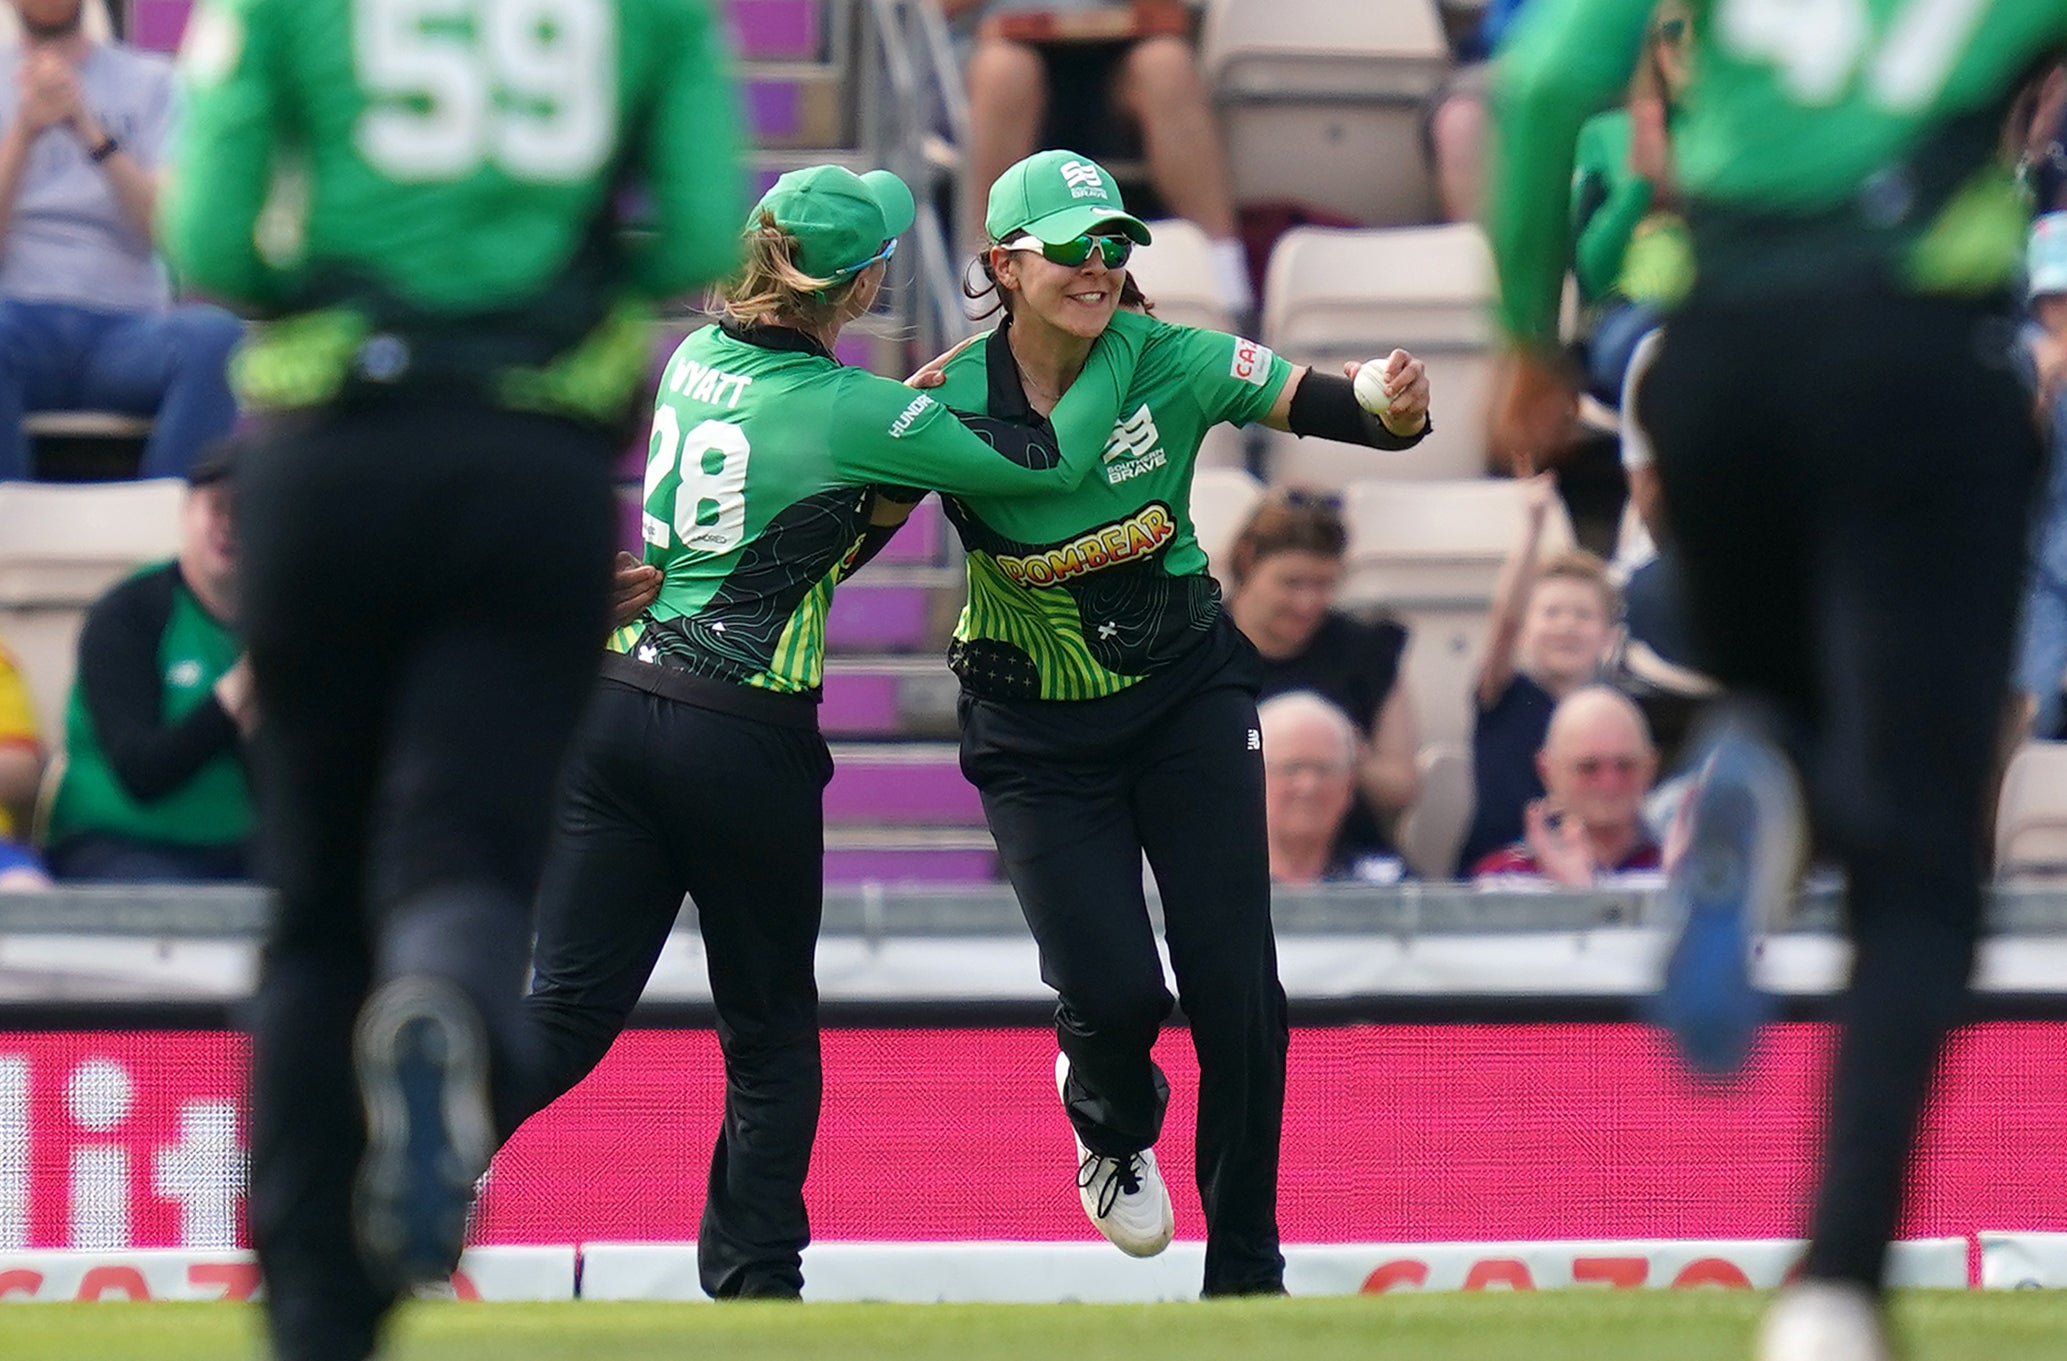 Southern Brave’s Maia Bouchier (right) celebrates catching Oval Invincibles’ Georgia Adams during The Hundred match at The Ageas Bowl, Southampton. Picture date: Monday August 16, 2021.